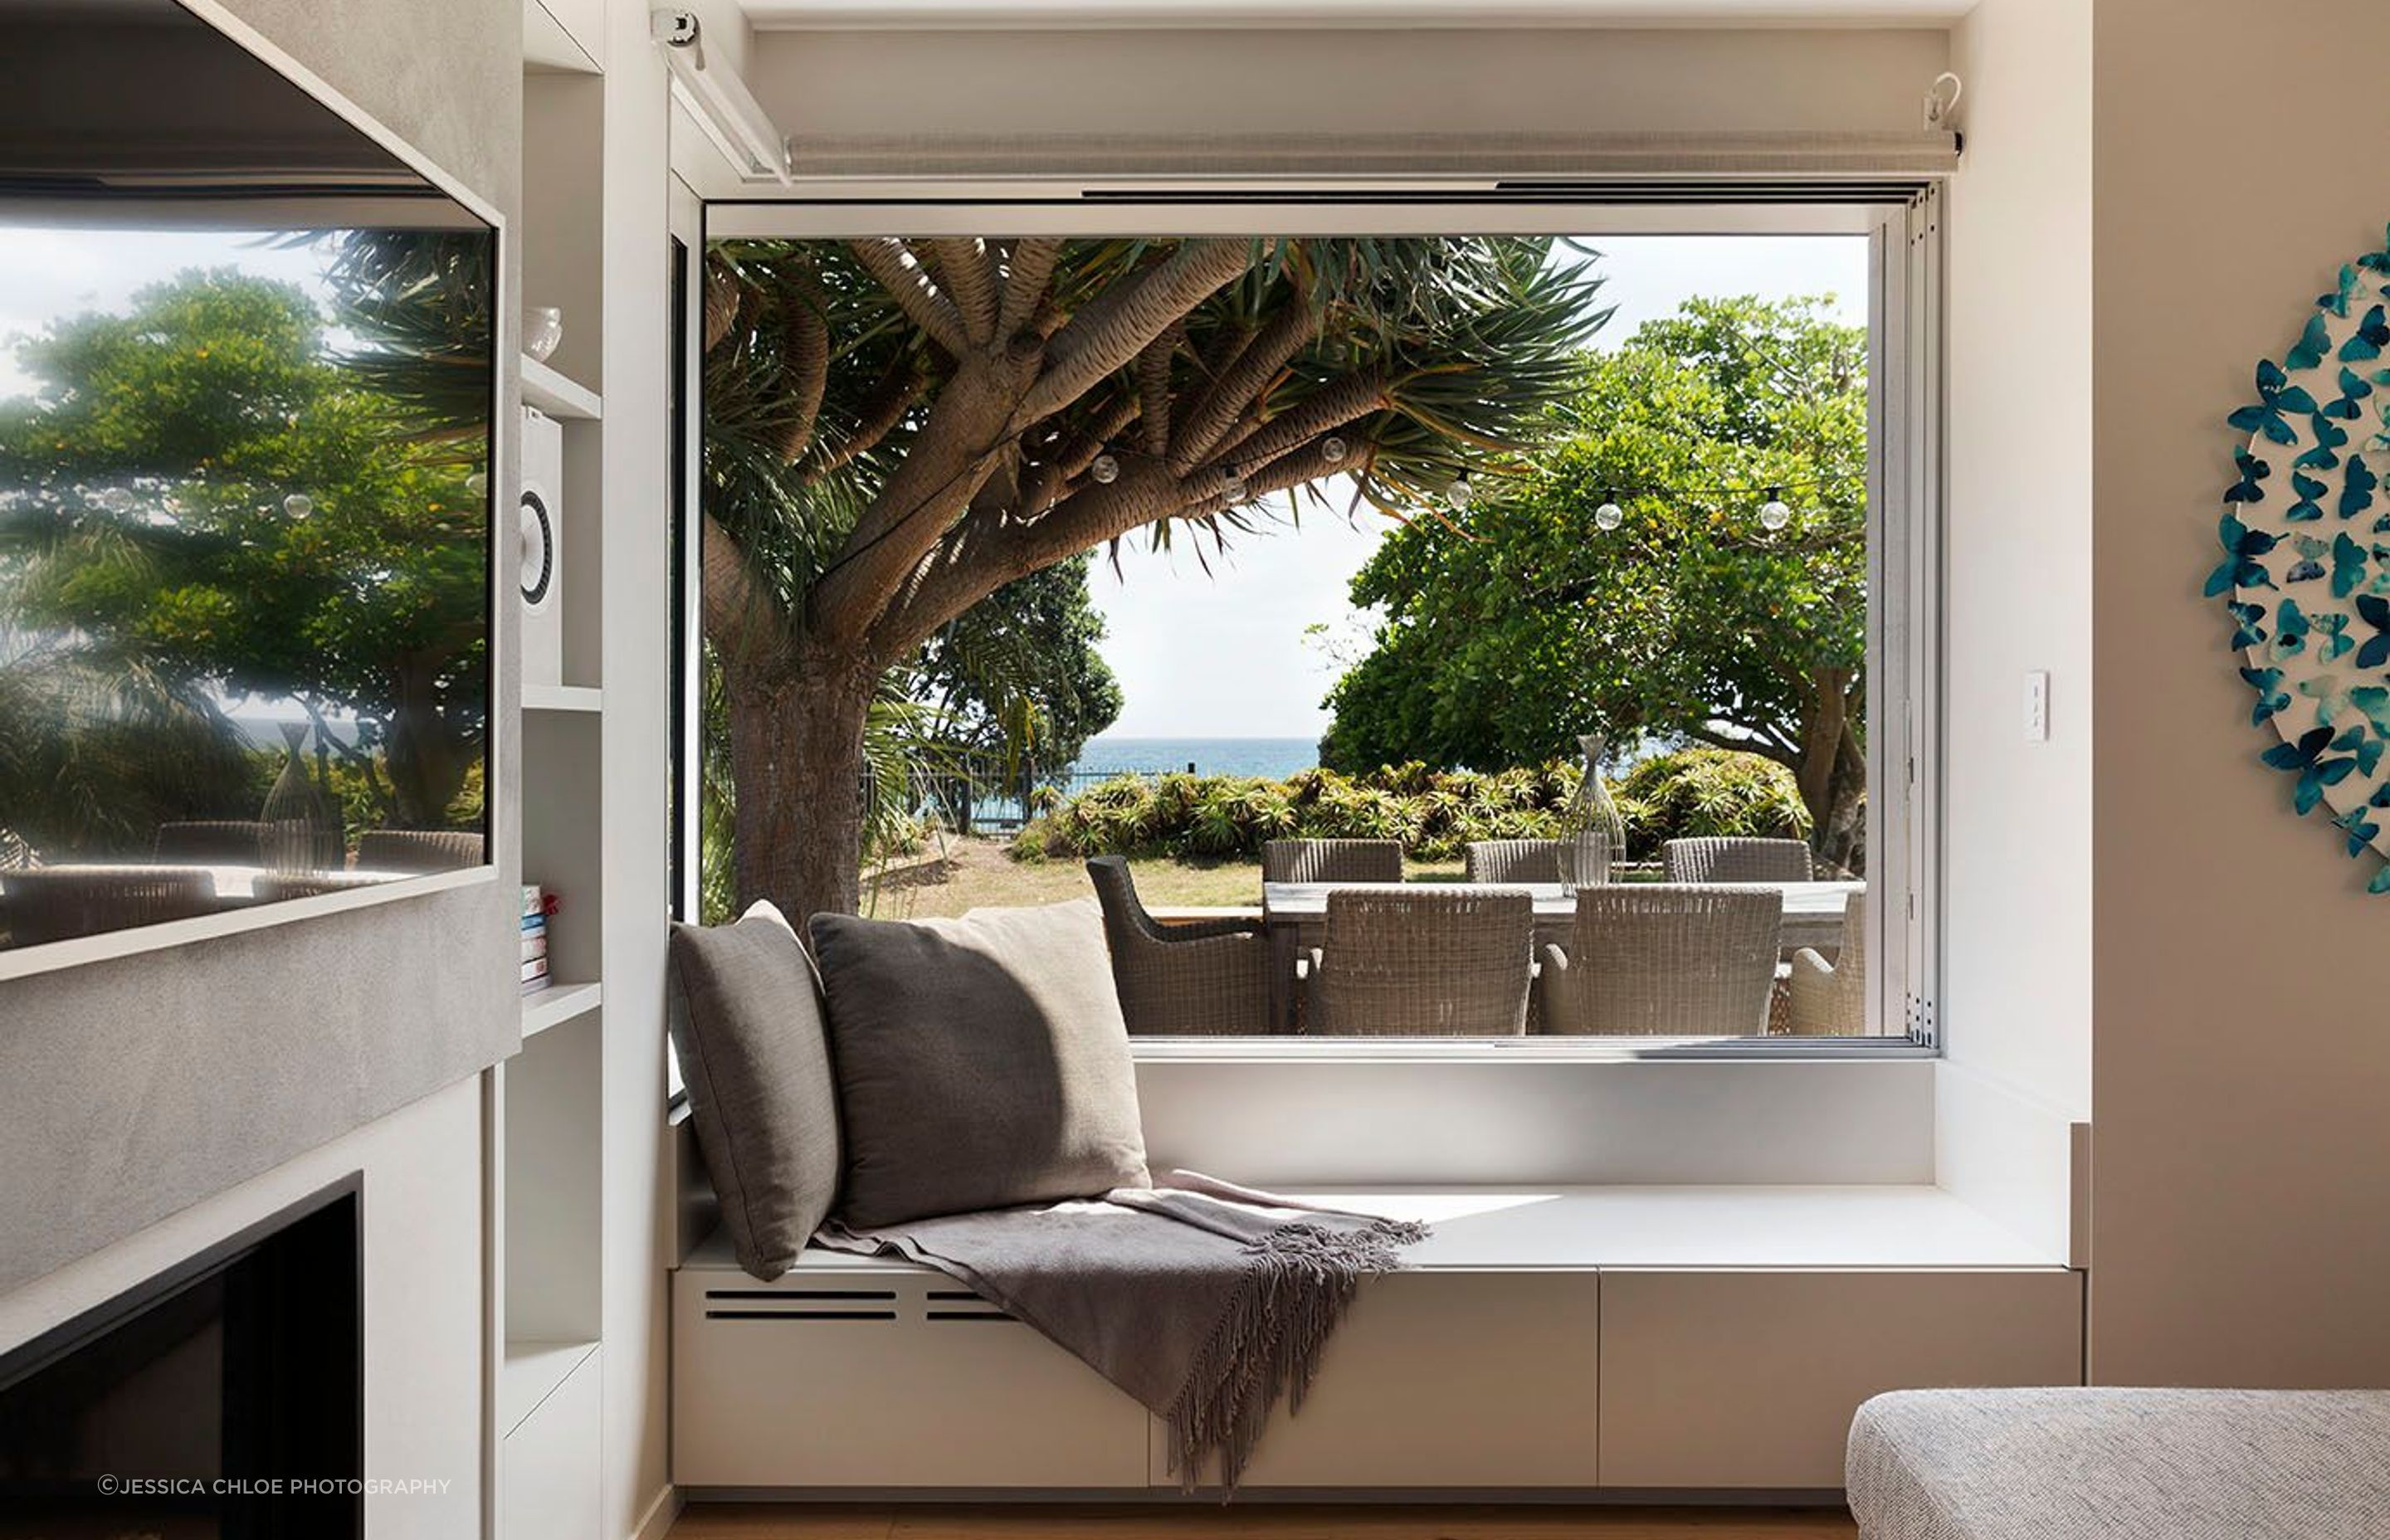 Corner window opens up flush with the wall to the stunning beachfront view and front yard